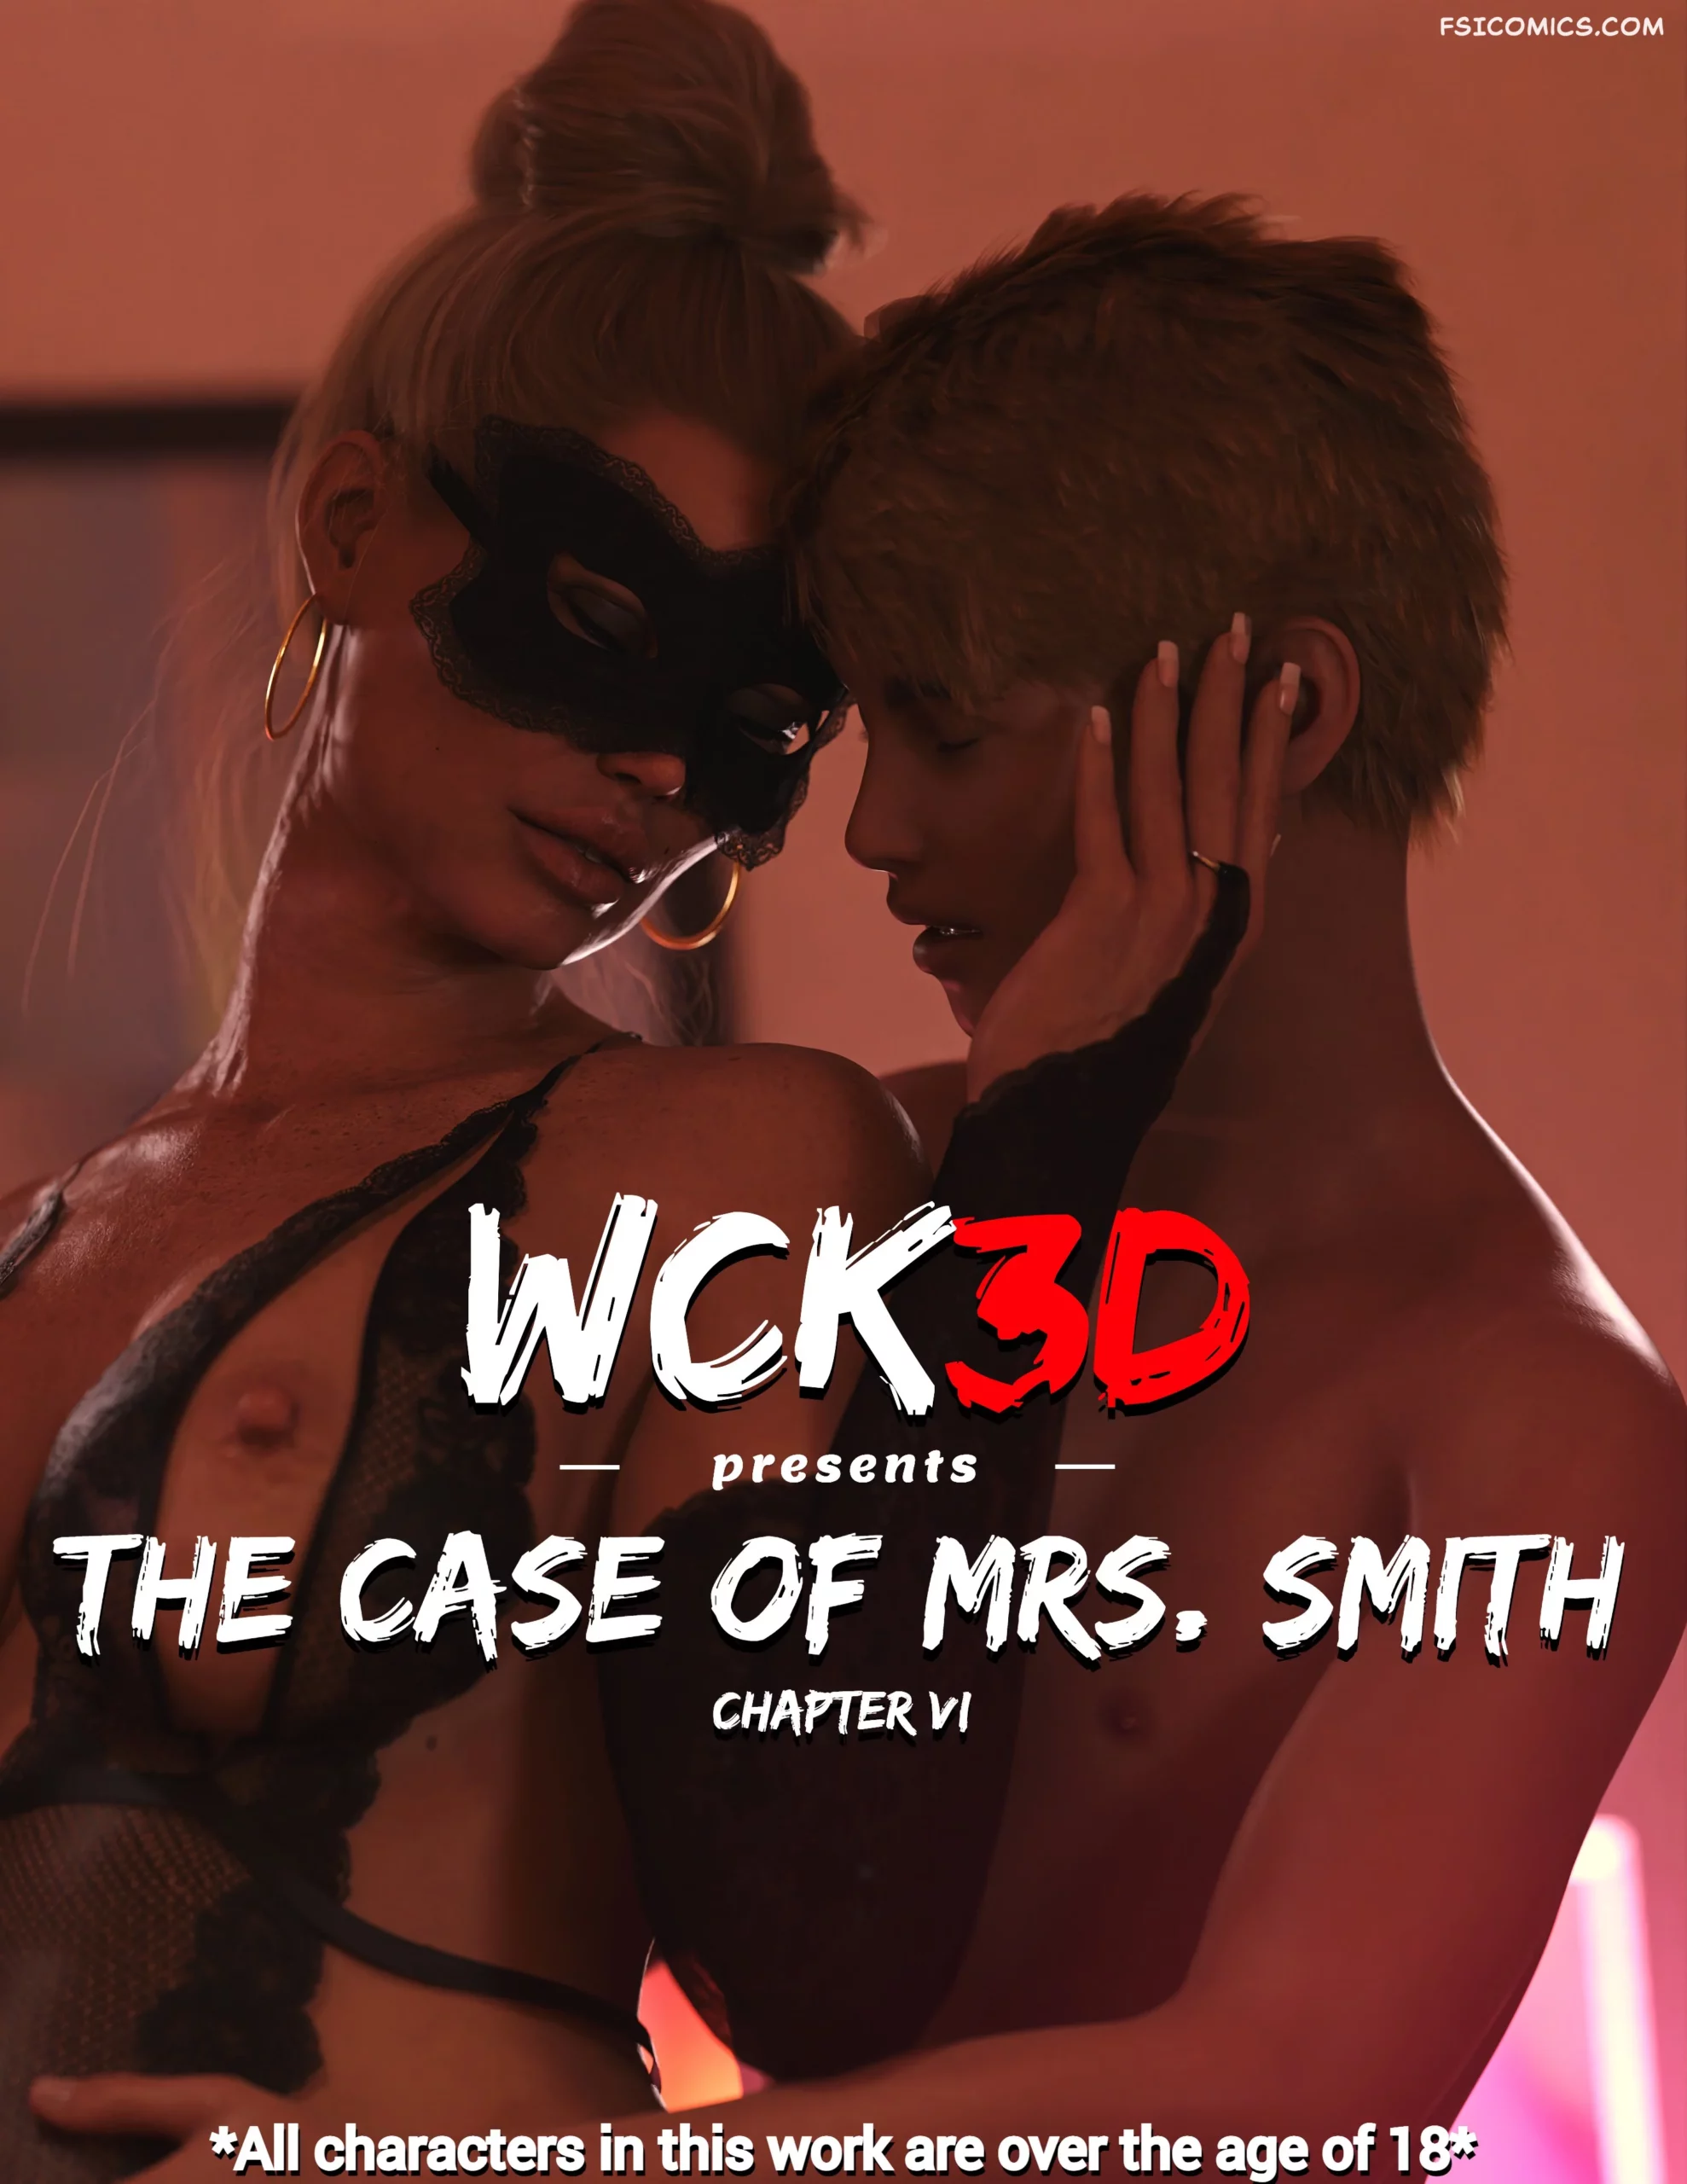 The Case Of Mrs Smith Chapter 6 – WCK3D - 3 - FSIComics